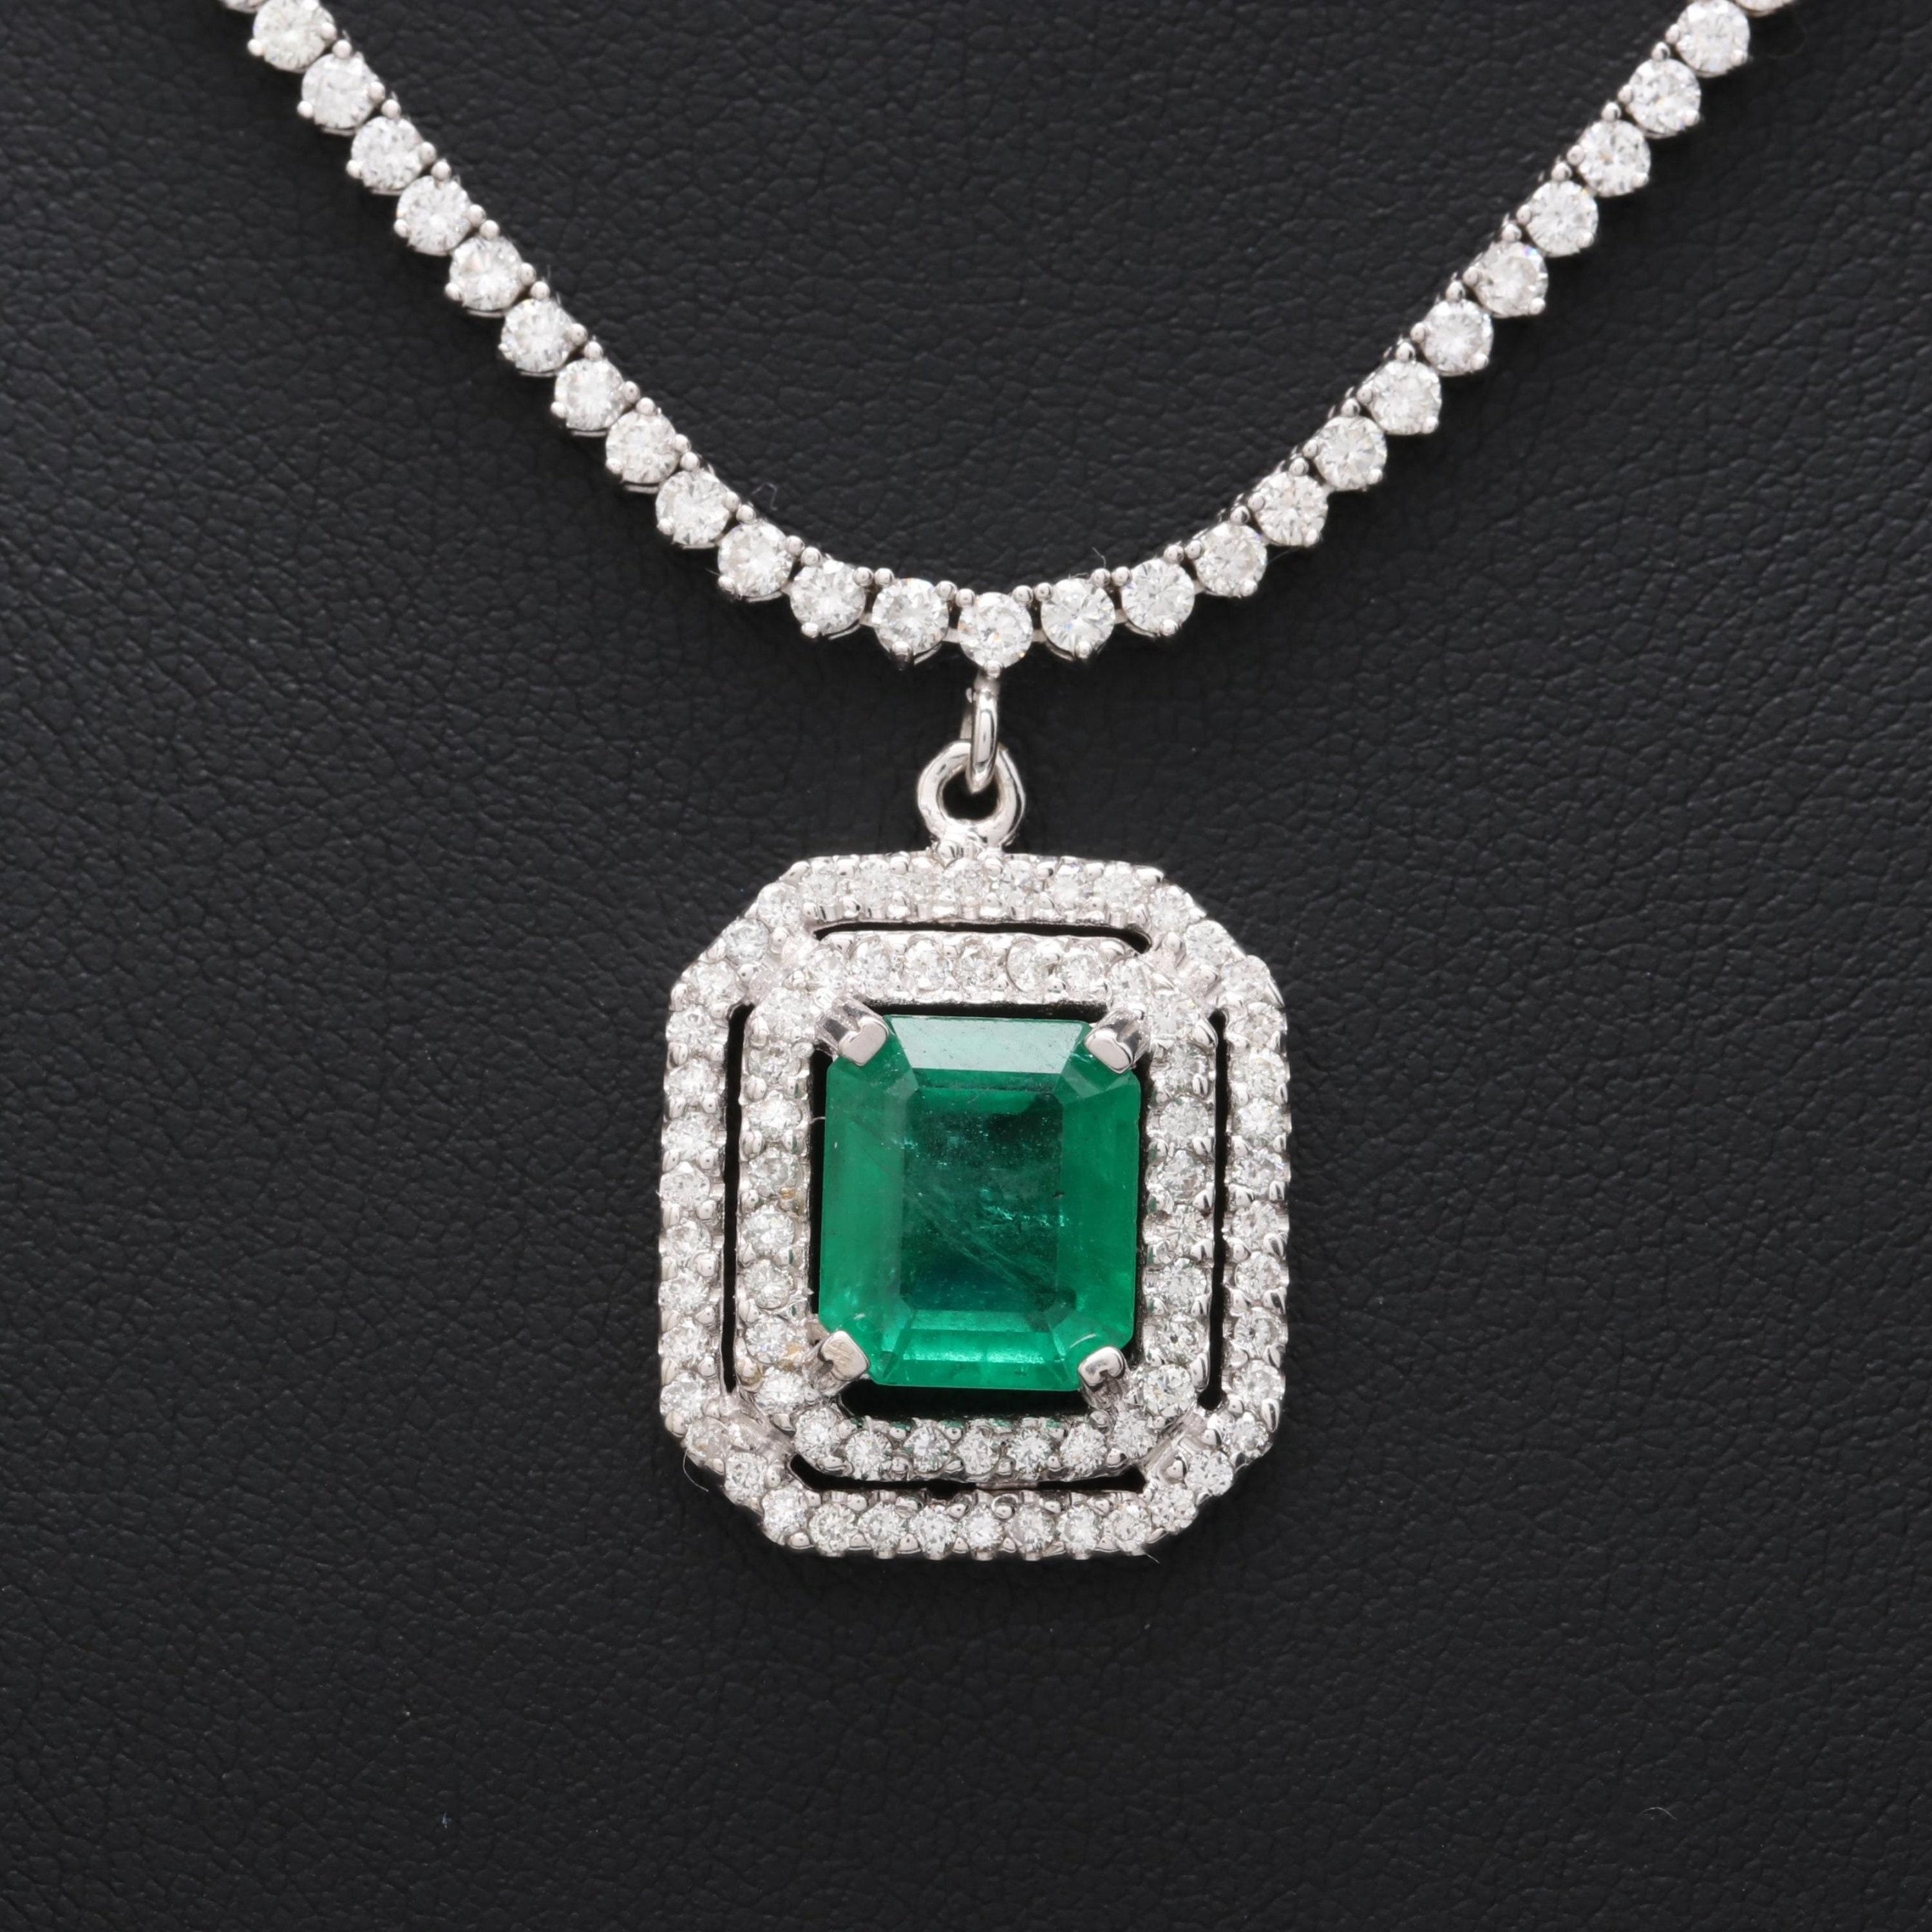 Vintage Emerald Cut Emerald Diamonds Necklace, Unique Natural Emerald Diamond Necklace,  Diamond Wedding Necklace
 
 Item Description
 → Handmade, Made to order
 → Material: SOLID 18K/18K GOLD
 
 
 Stone Details
 
 → Primary Stone(s) Type: Emerald
